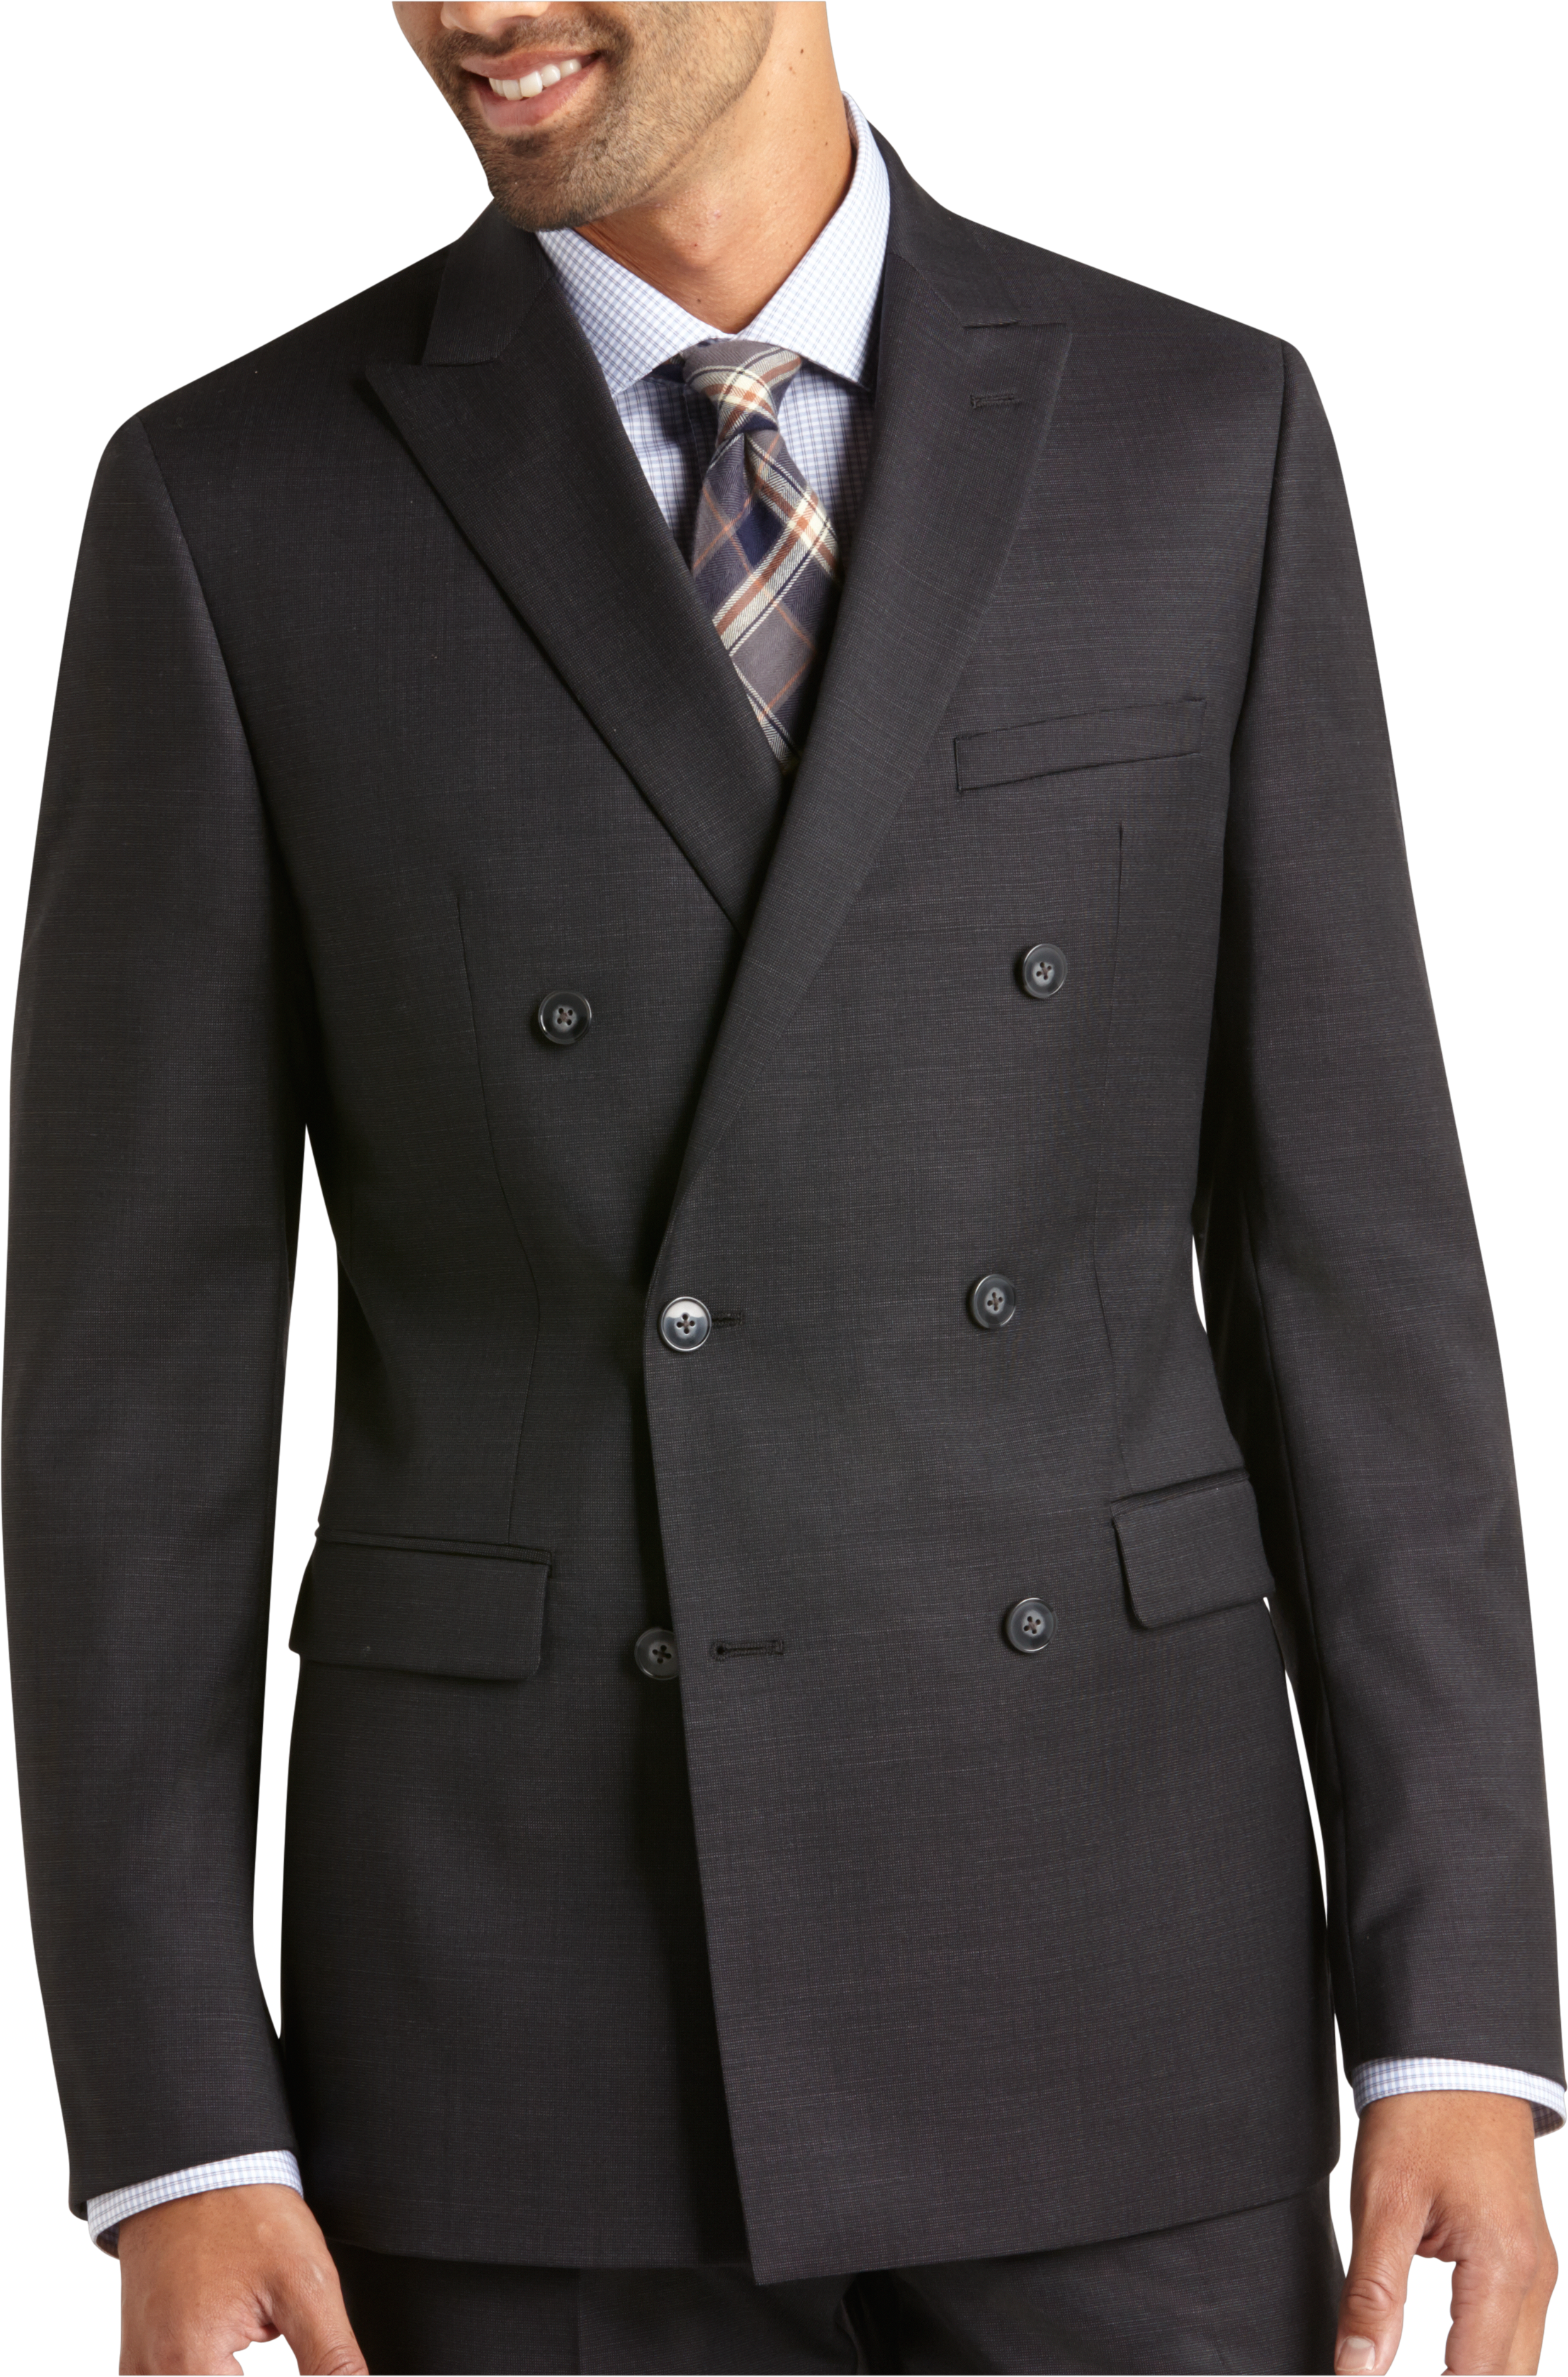 Calvin Klein Black Tic Double Breasted Extreme Slim Fit Suit - Men's ...